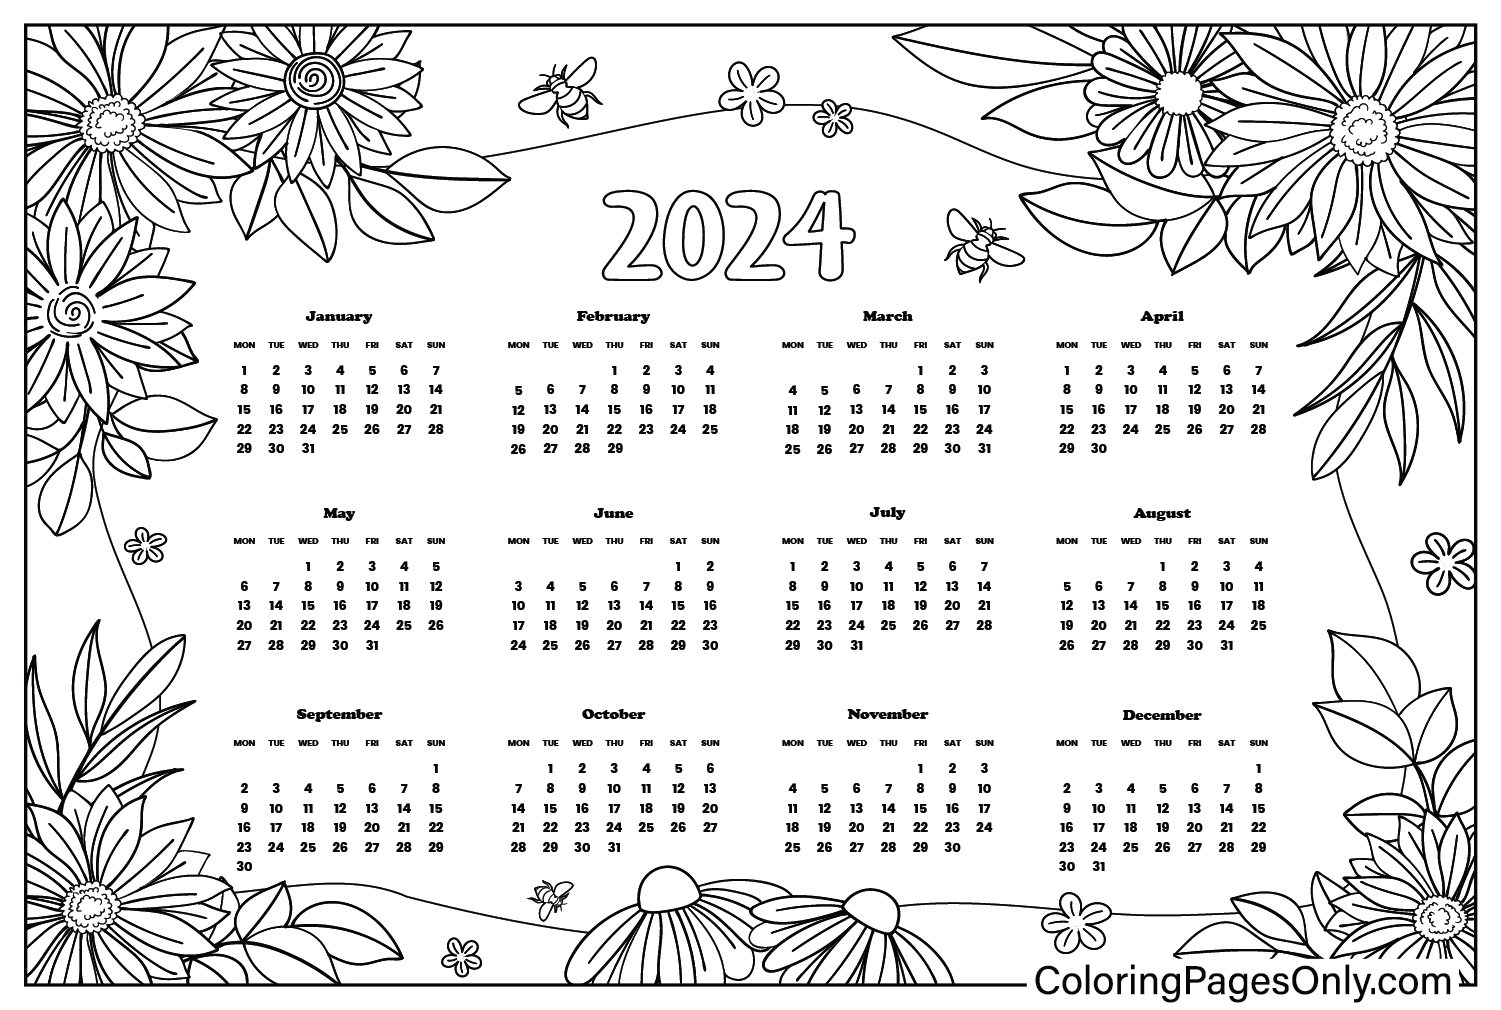 Calendar 2024 Coloring Pages Free Printable Coloring Pages